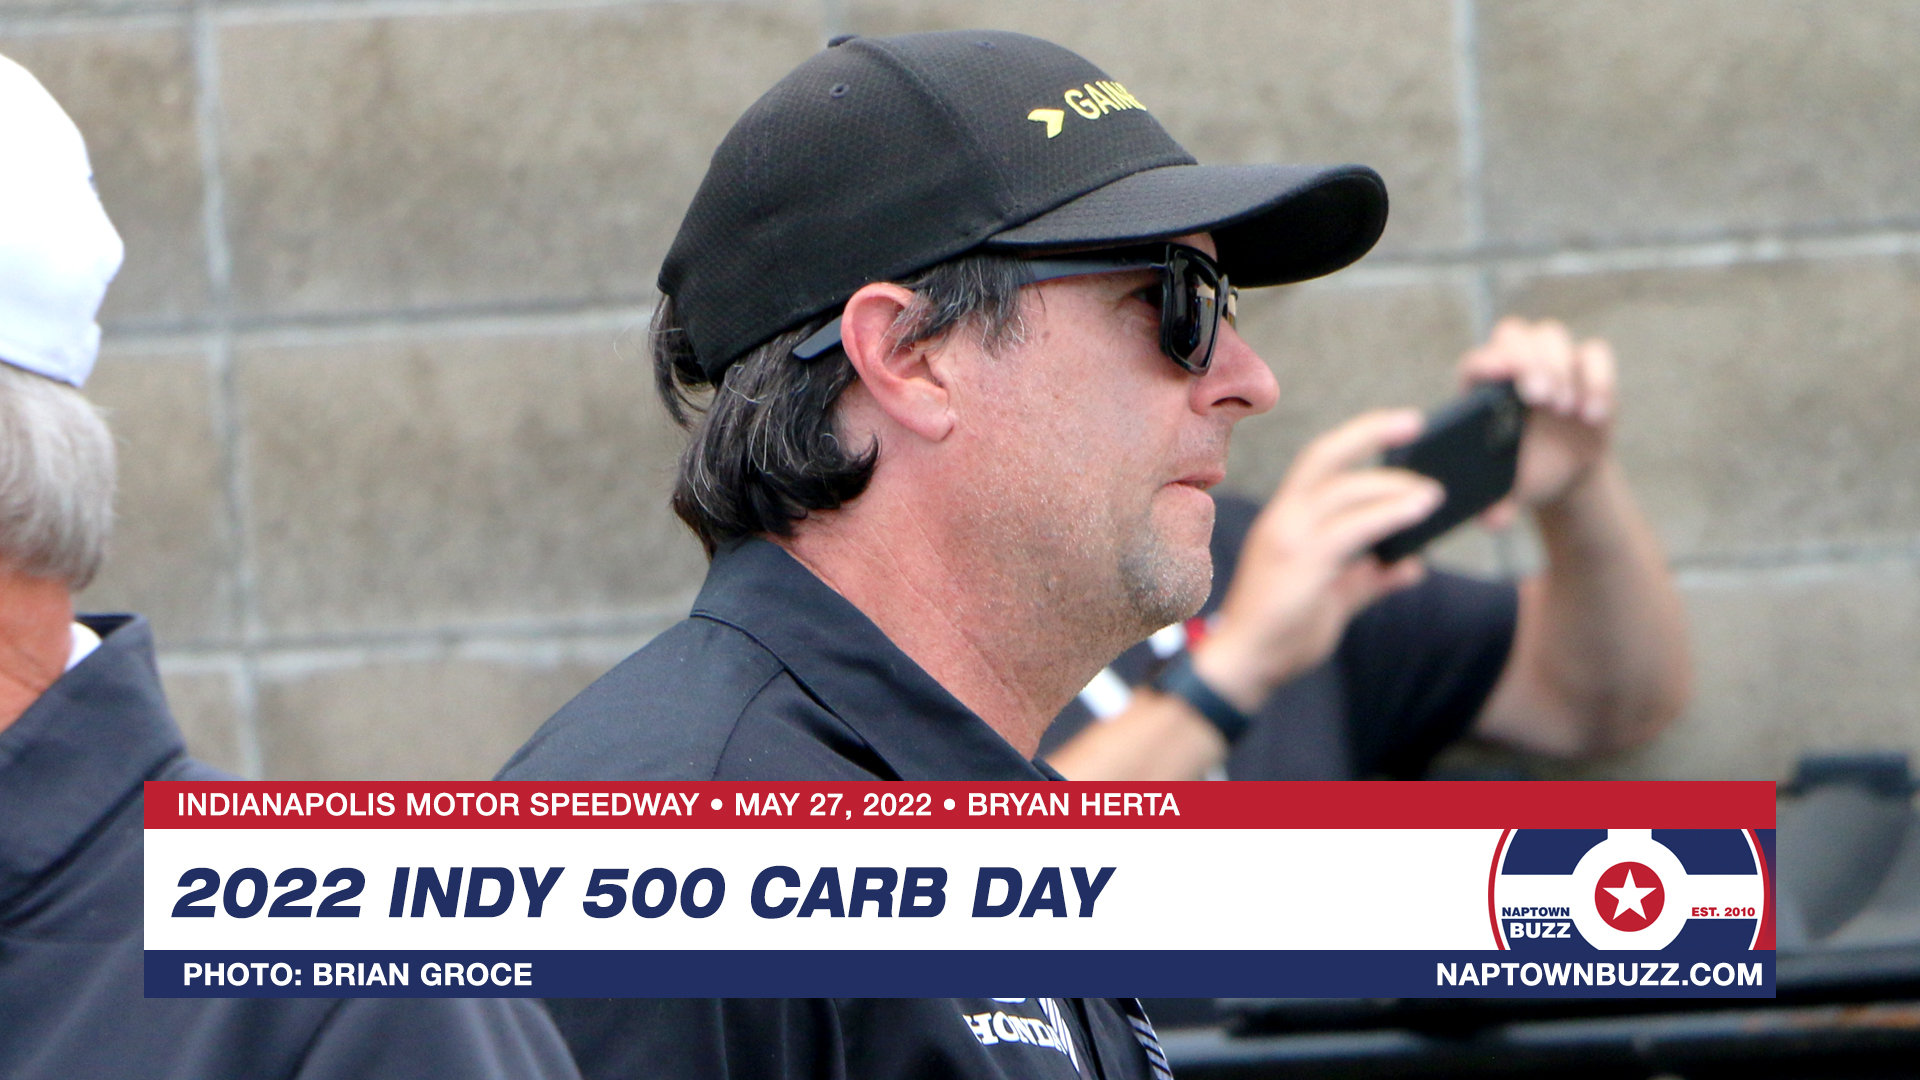 Indy 500 Carb Day May 27, 2022 Bryan Herta